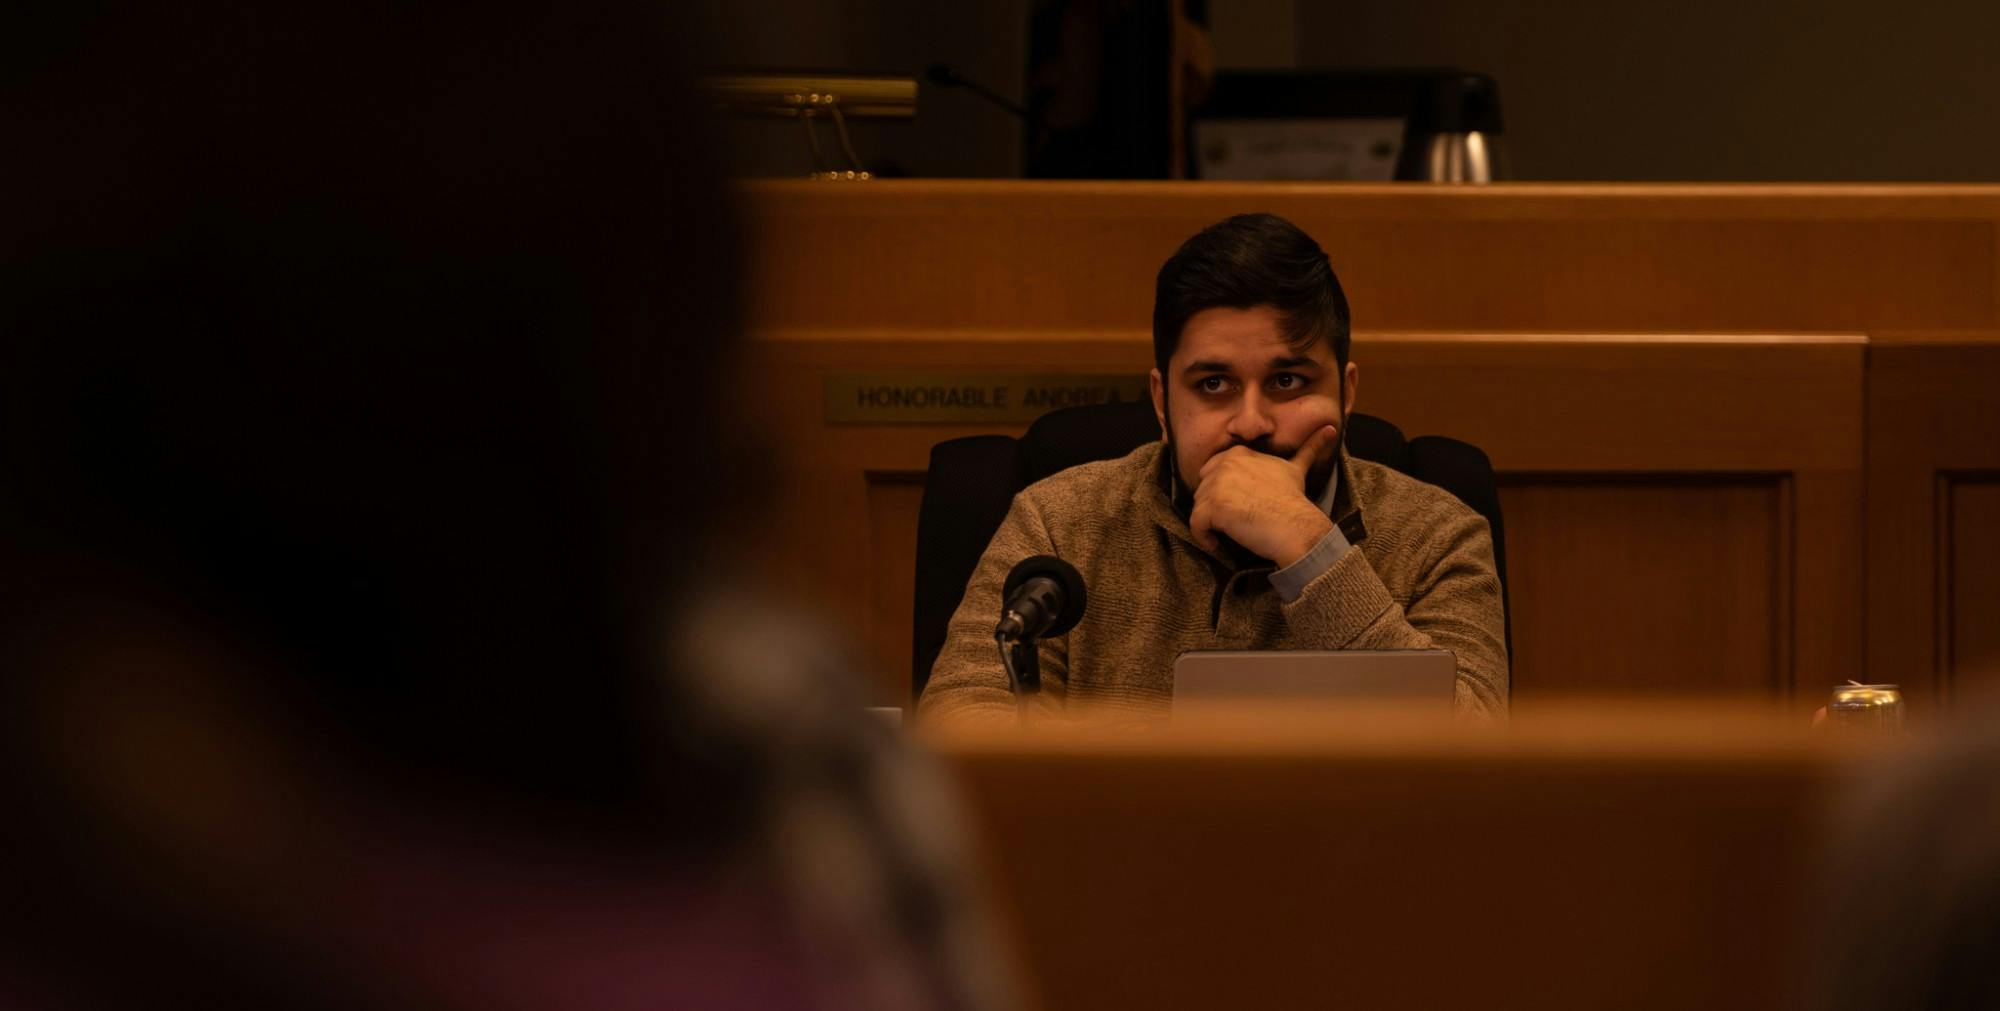 <p>Mayor Pro Tem Aaron Stephens listens from the audience during the city council discussion only meeting on Feb. 18, 2020.</p>